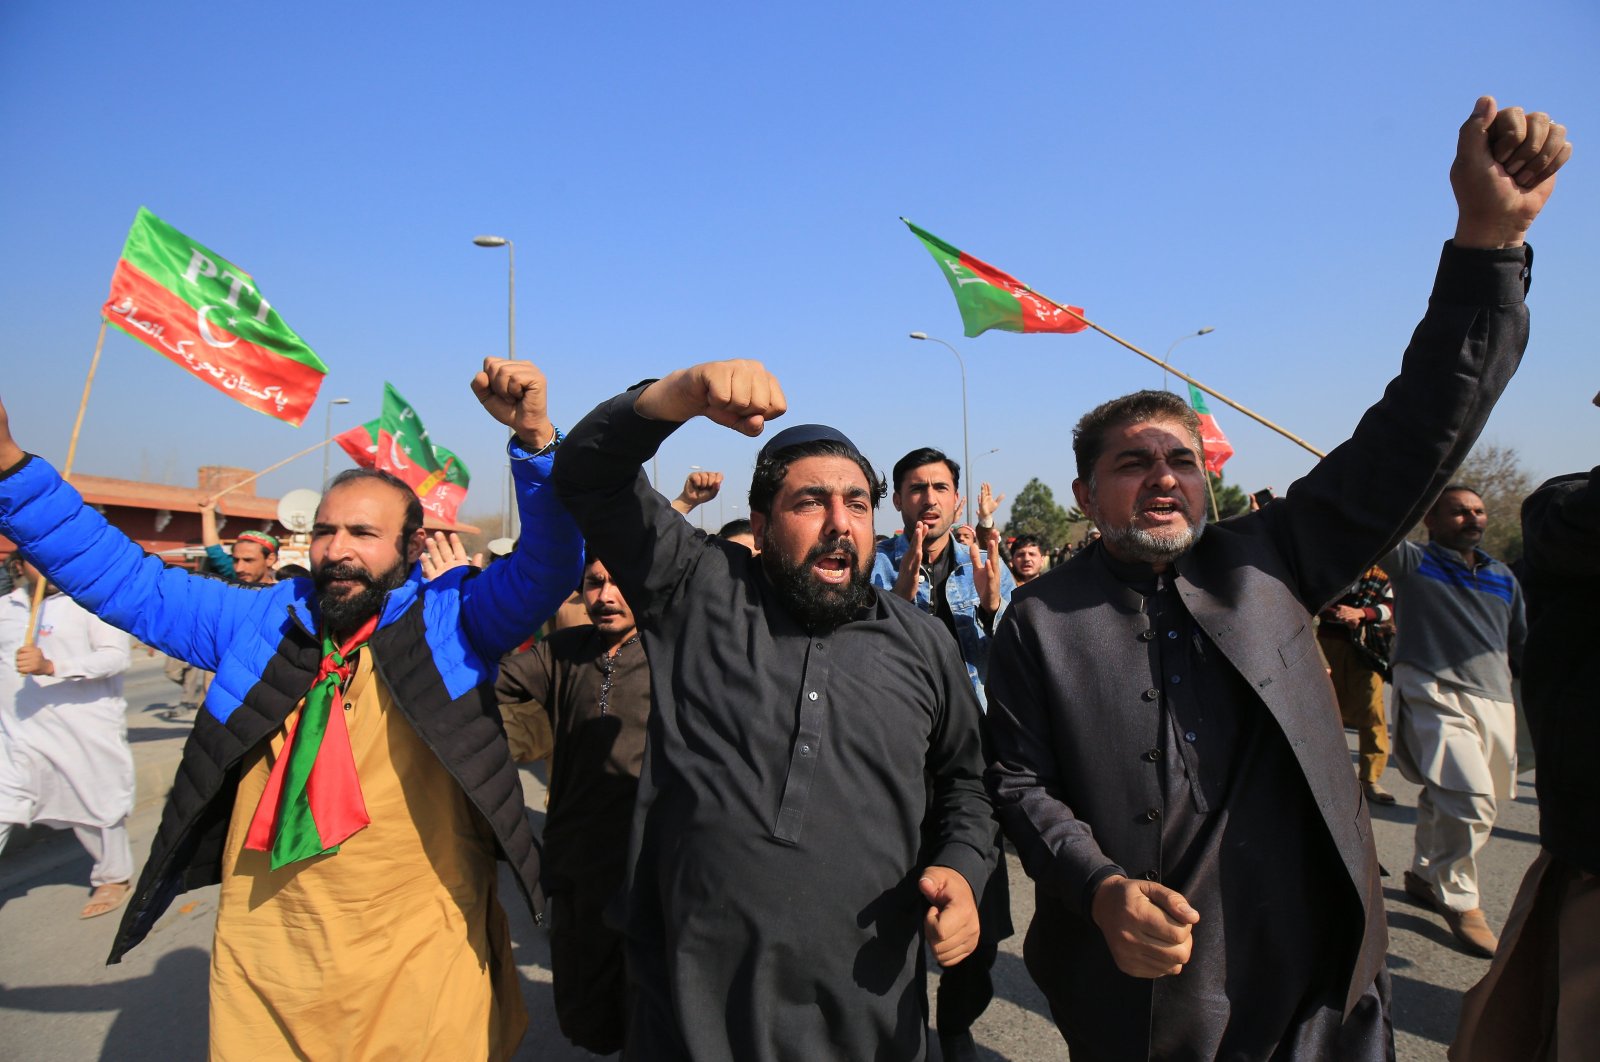 Supporters of the Pakistan Tehrik-e-Insaf (PTI) political party gather to protest alleged rigging in the general elections, in Peshawar, Pakistan, Feb. 11, 2024. (EPA Photo)